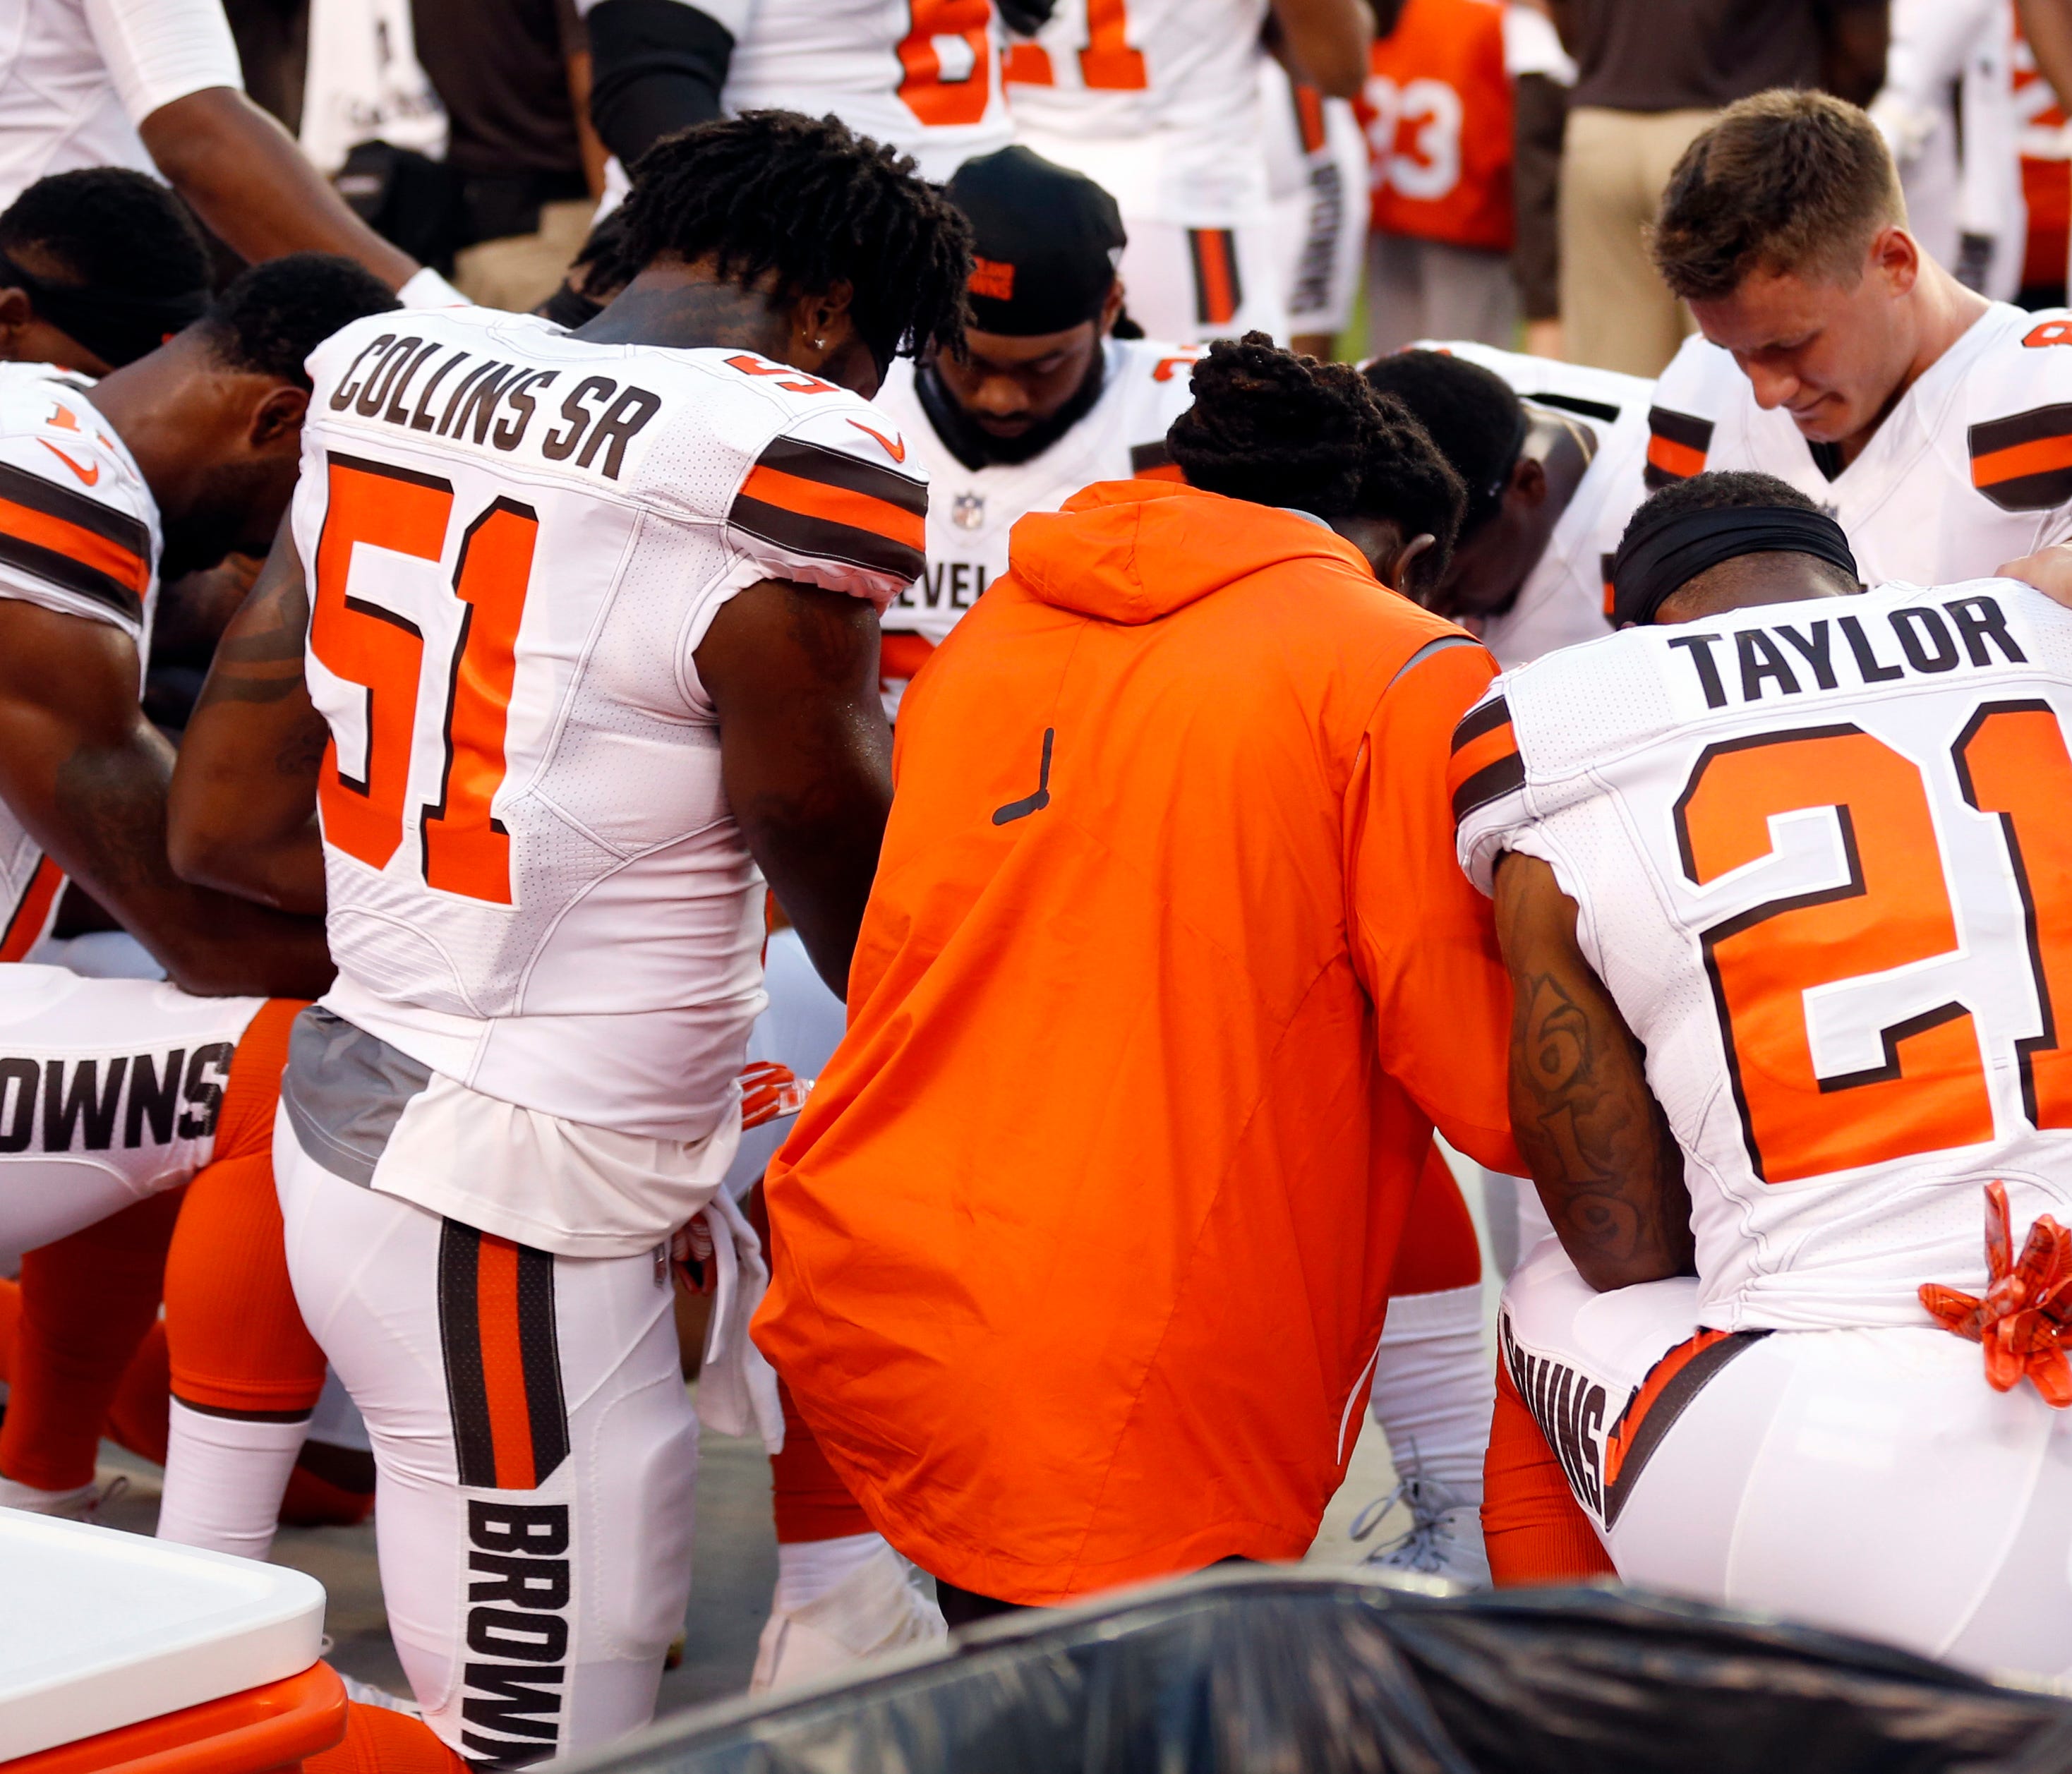 Members of the Cleveland Browns kneel during the national anthem before an NFL preseason football game between the New York Giants and the Cleveland Browns, Monday, Aug. 21, 2017, in Cleveland. (AP Photo/Ron Schwane) ORG XMIT: CDS10